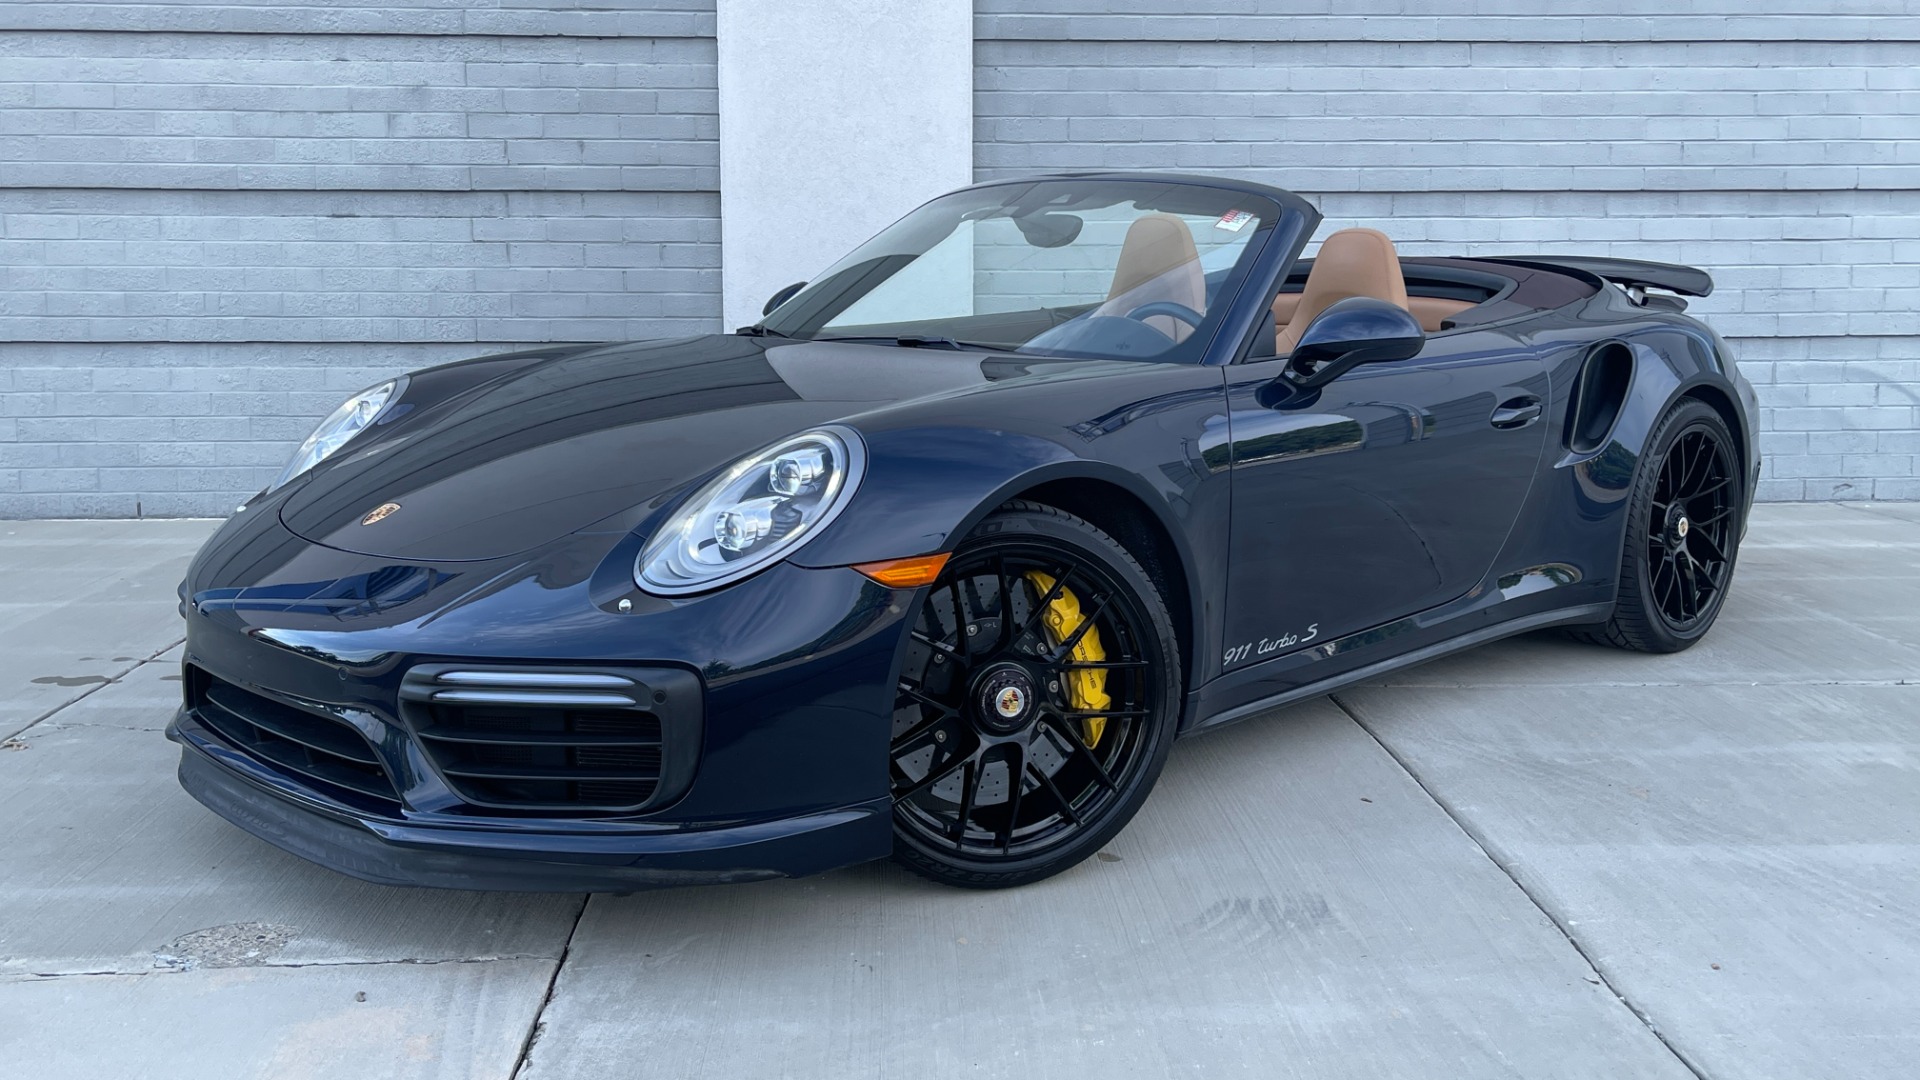 Used 2017 Porsche 911 Turbo S / CABRIOLET / FRONT LIFT / PDK / 20IN WHEELS for sale $179,999 at Formula Imports in Charlotte NC 28227 4